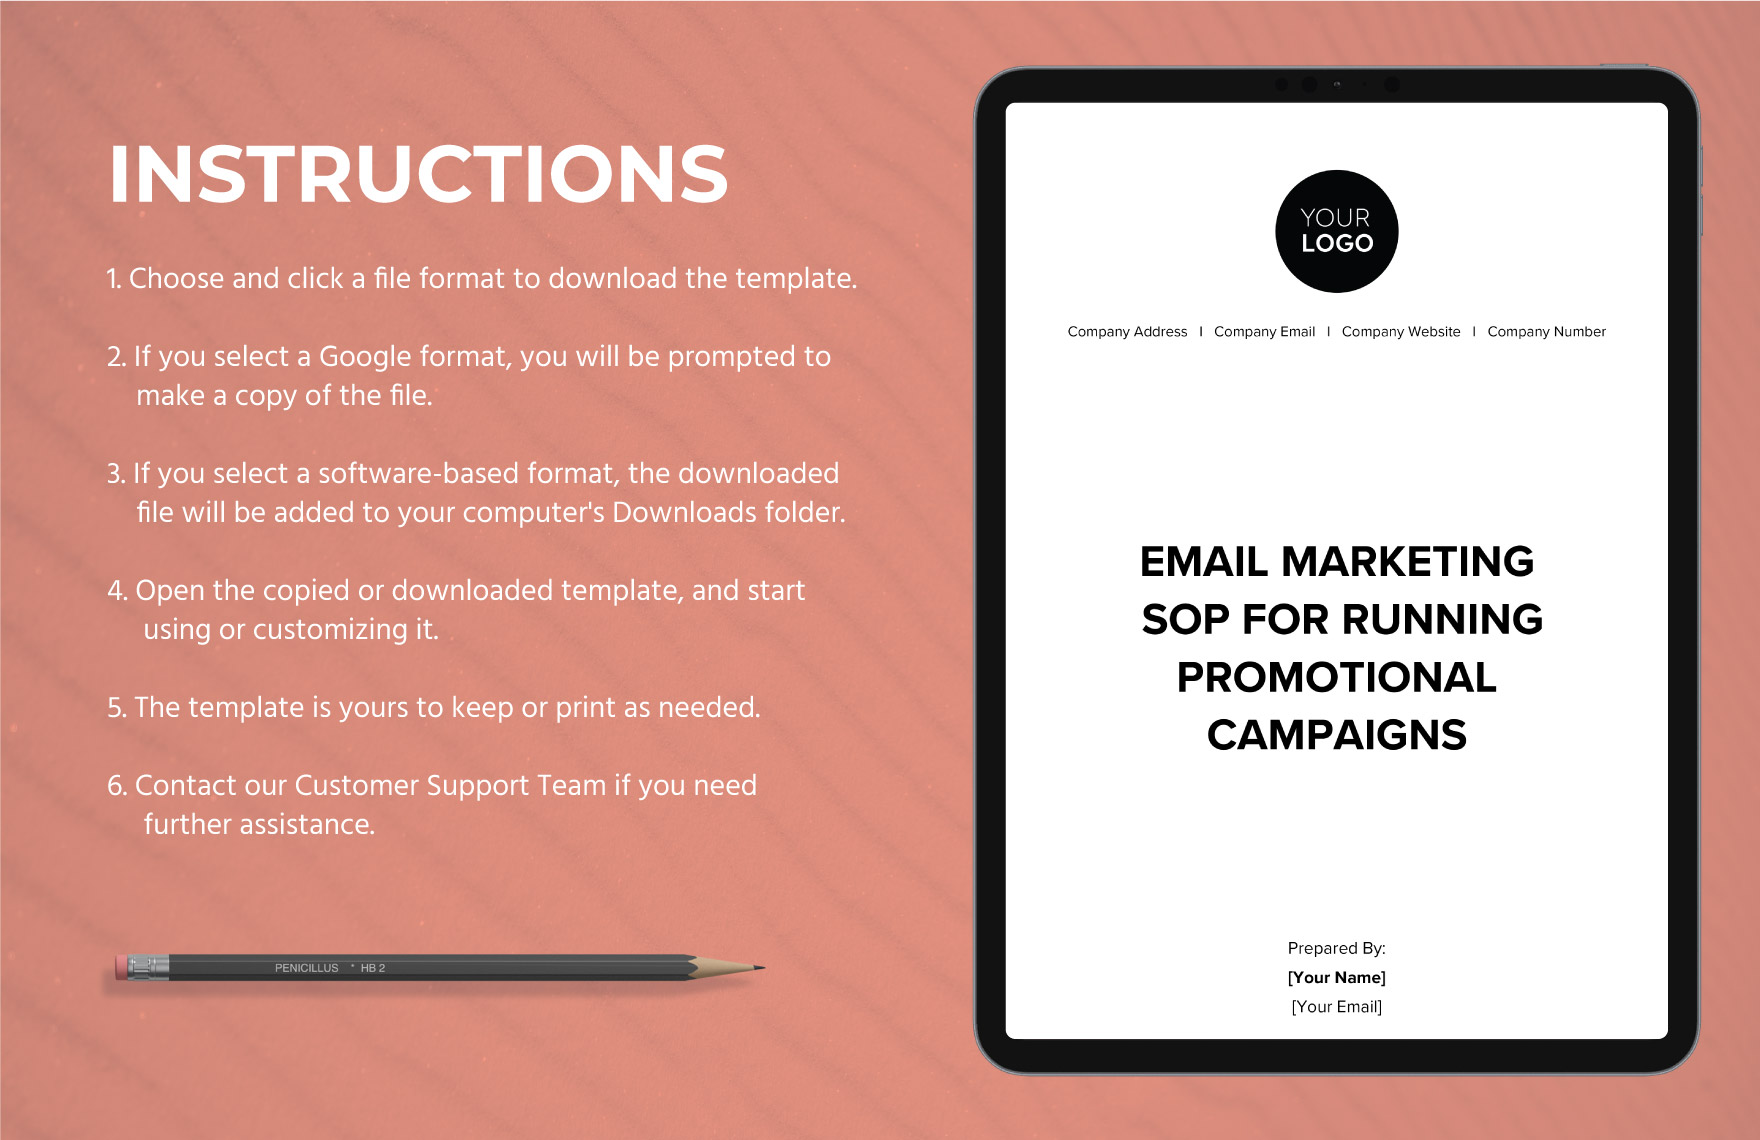 Email Marketing SOP for Running Promotional Campaigns Template